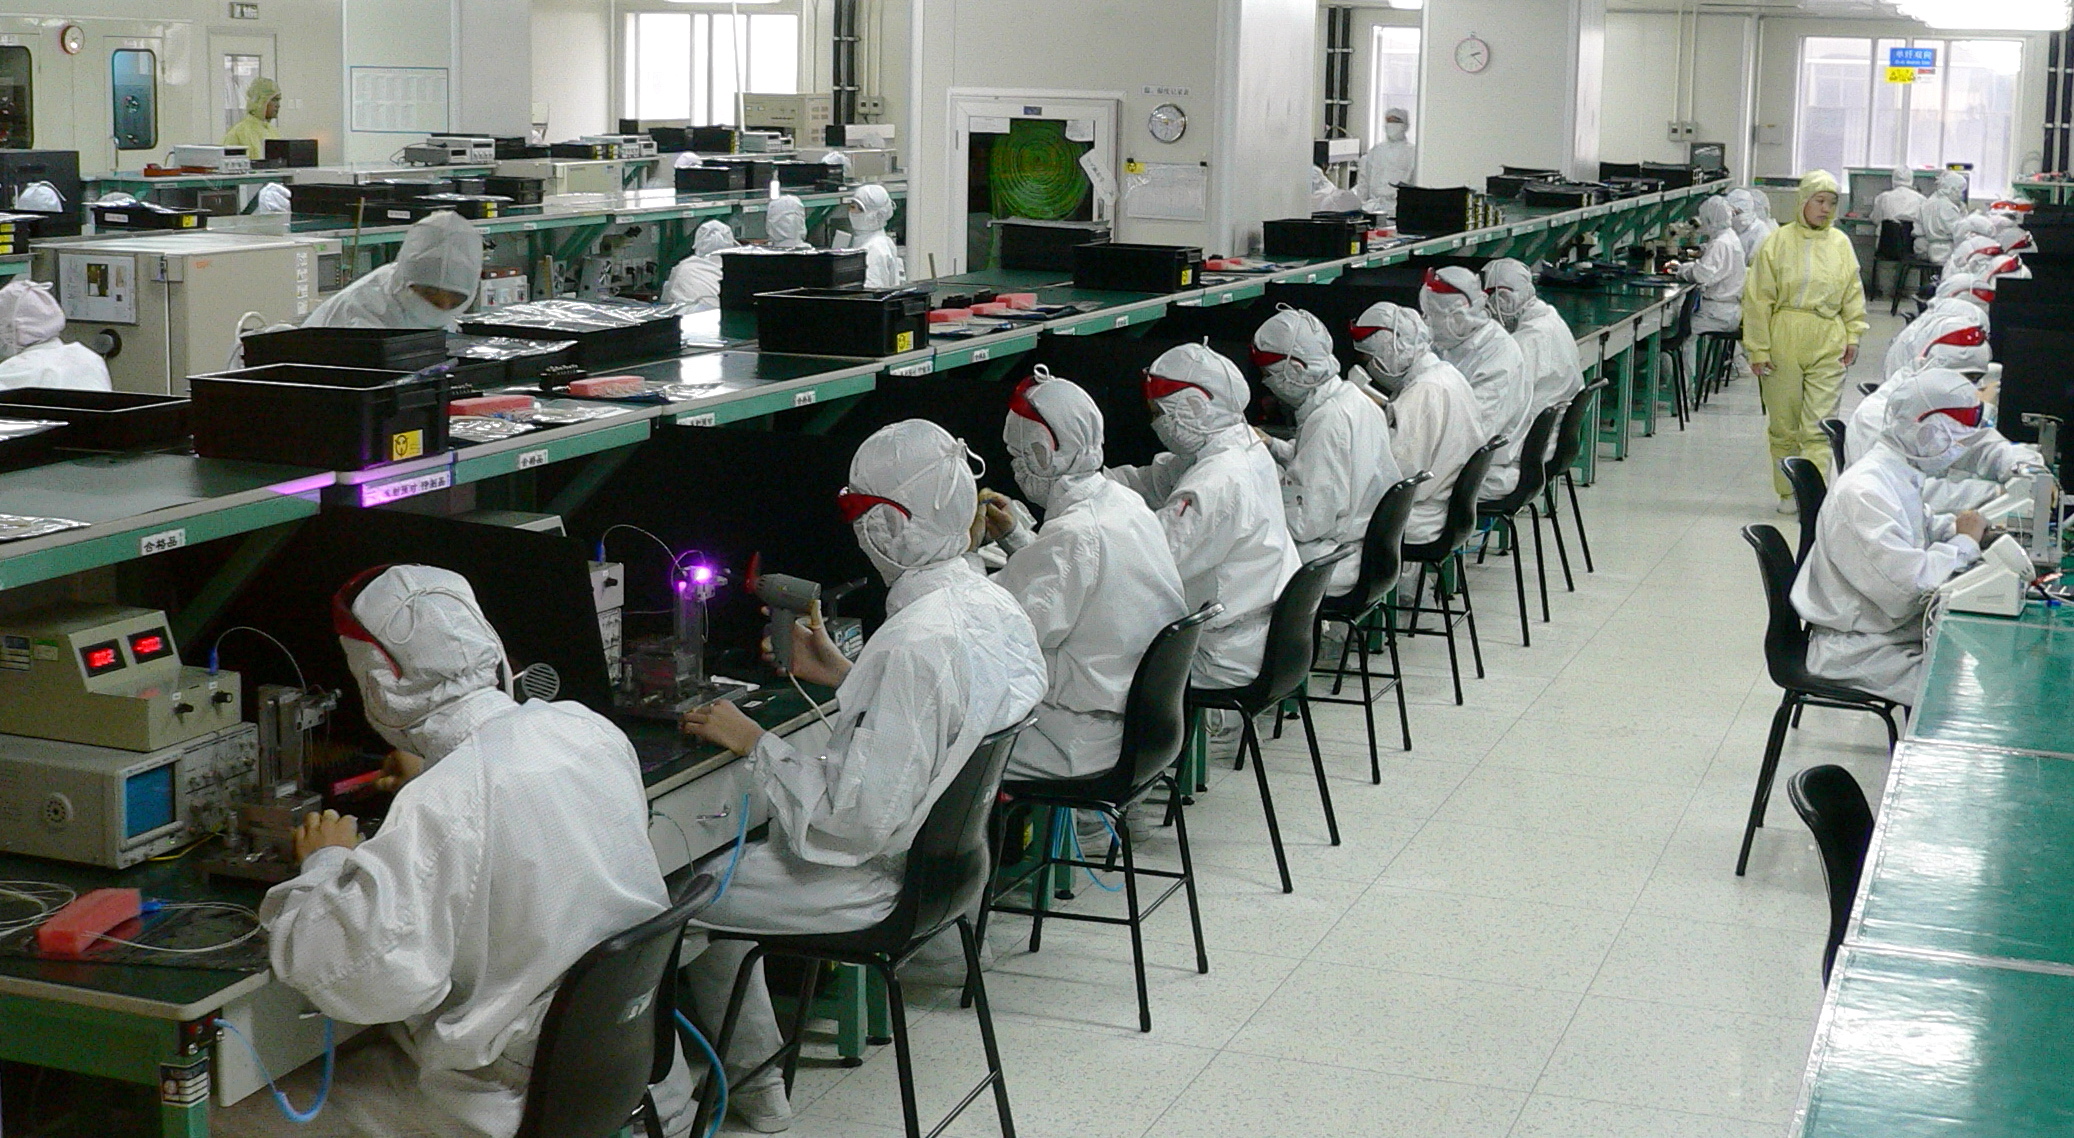 Lockdown at Foxconn in China: Workers flee in droves - iPhone production at risk